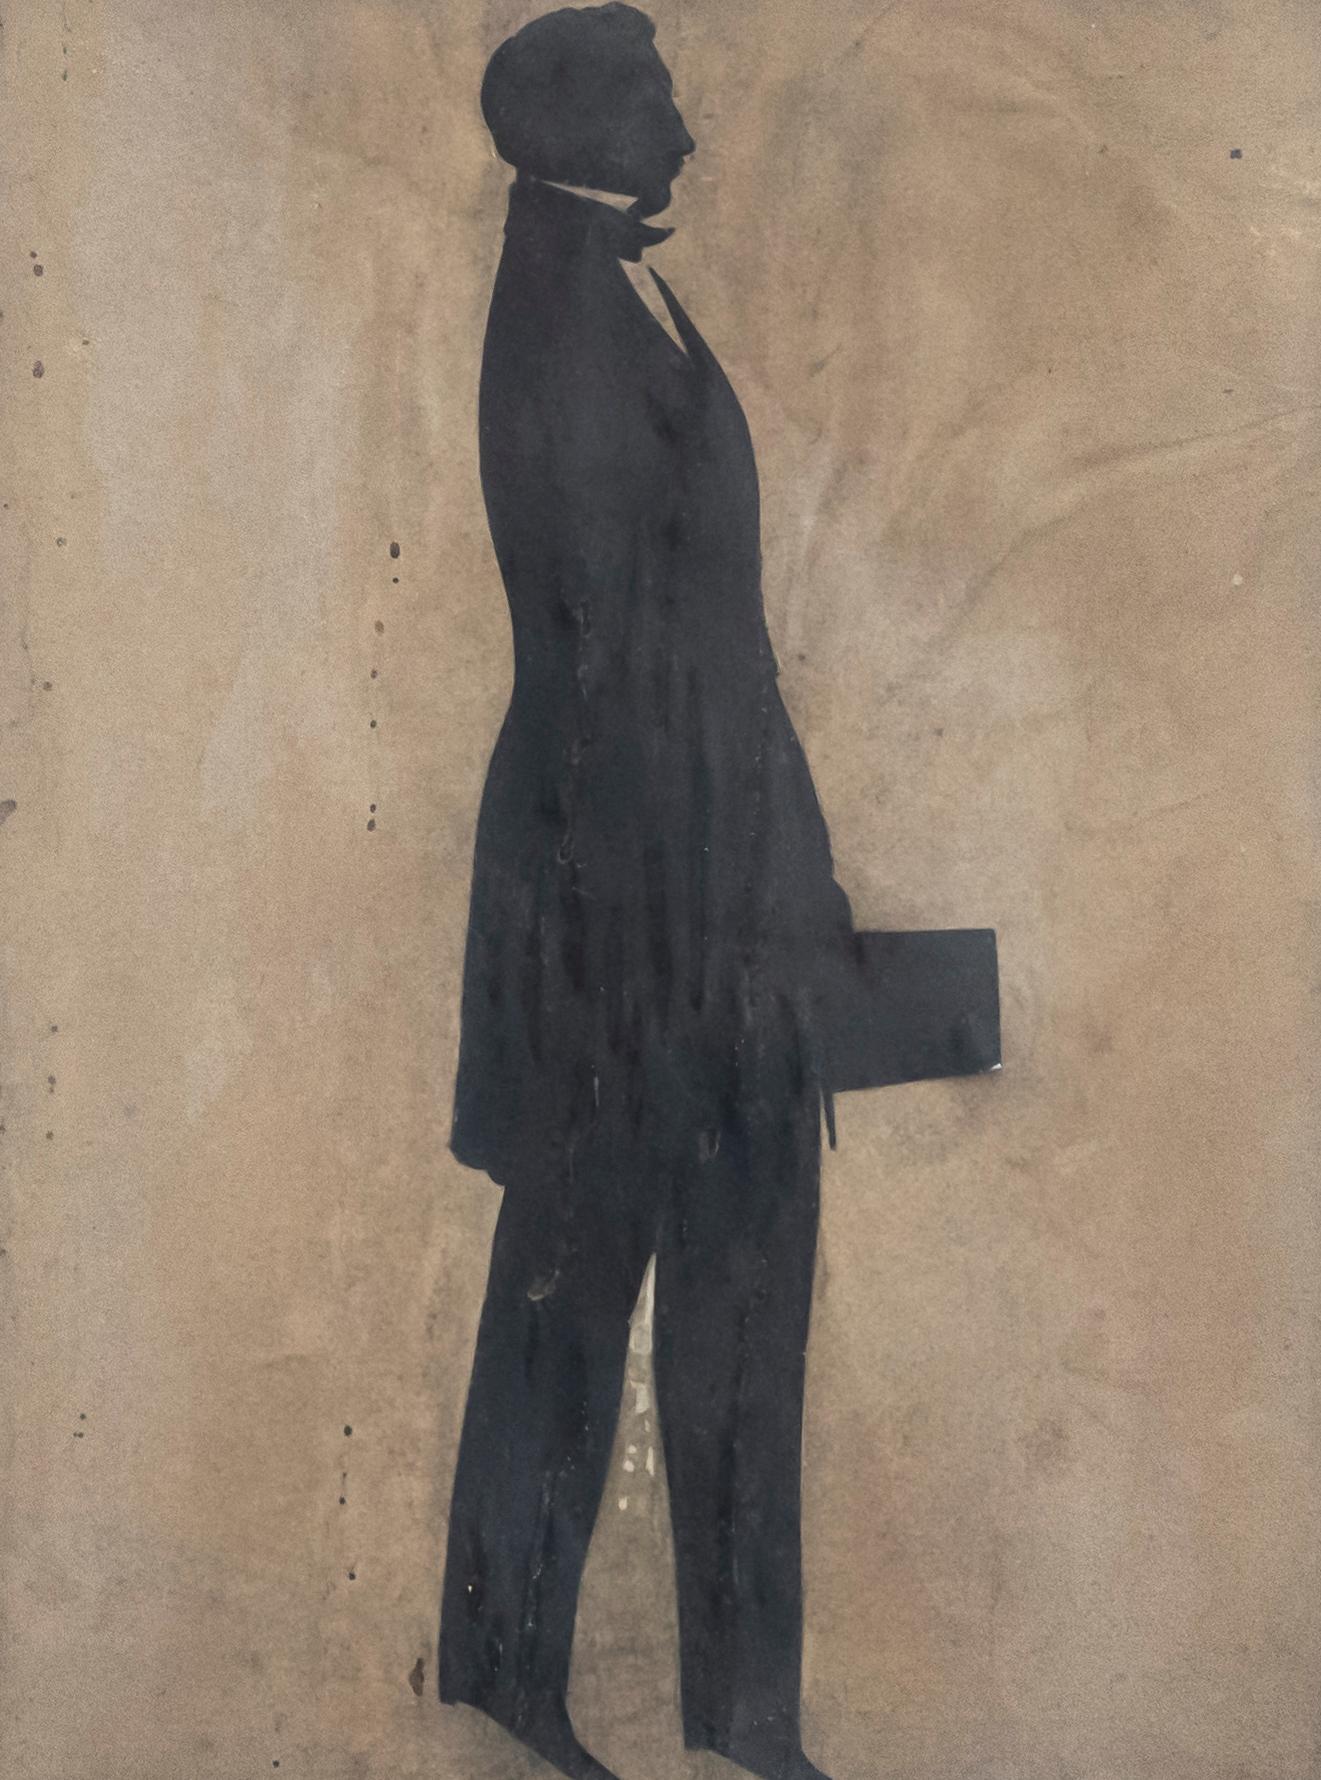 A delightful silhouette study of a man in fine dress carrying a bag. The figure is depicted on his toes giving him an air of elegance and poise. Unsigned. Presented in a dark wooden frame. On paper.
